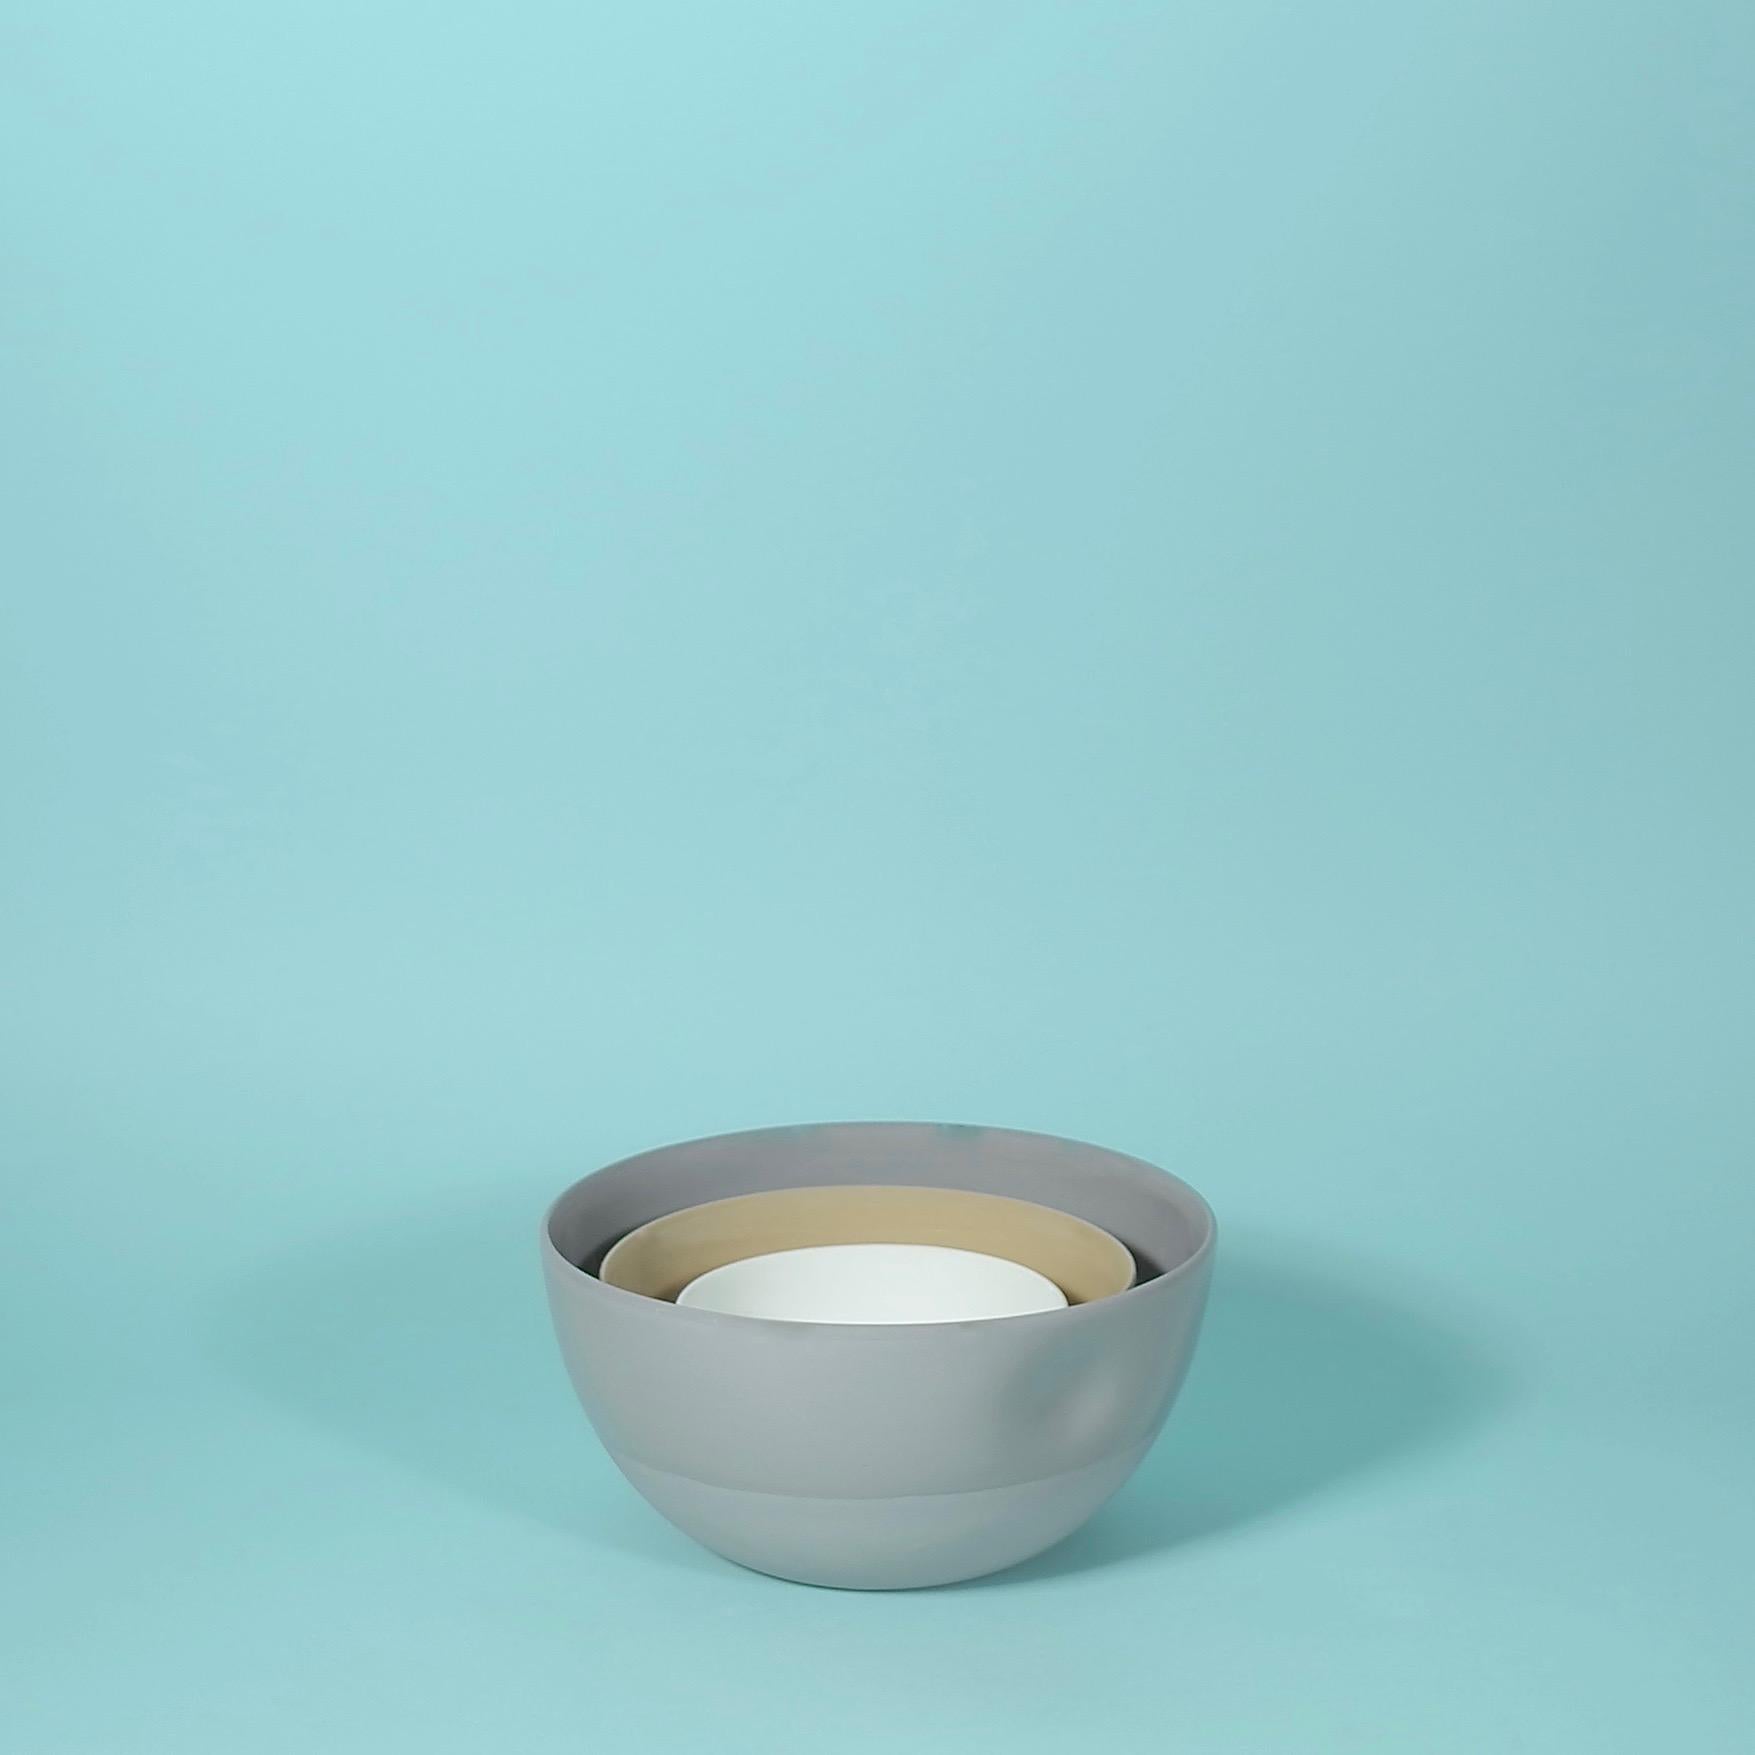 Chinese Small Dimpled Porcelain Bowl in Matte Bisque